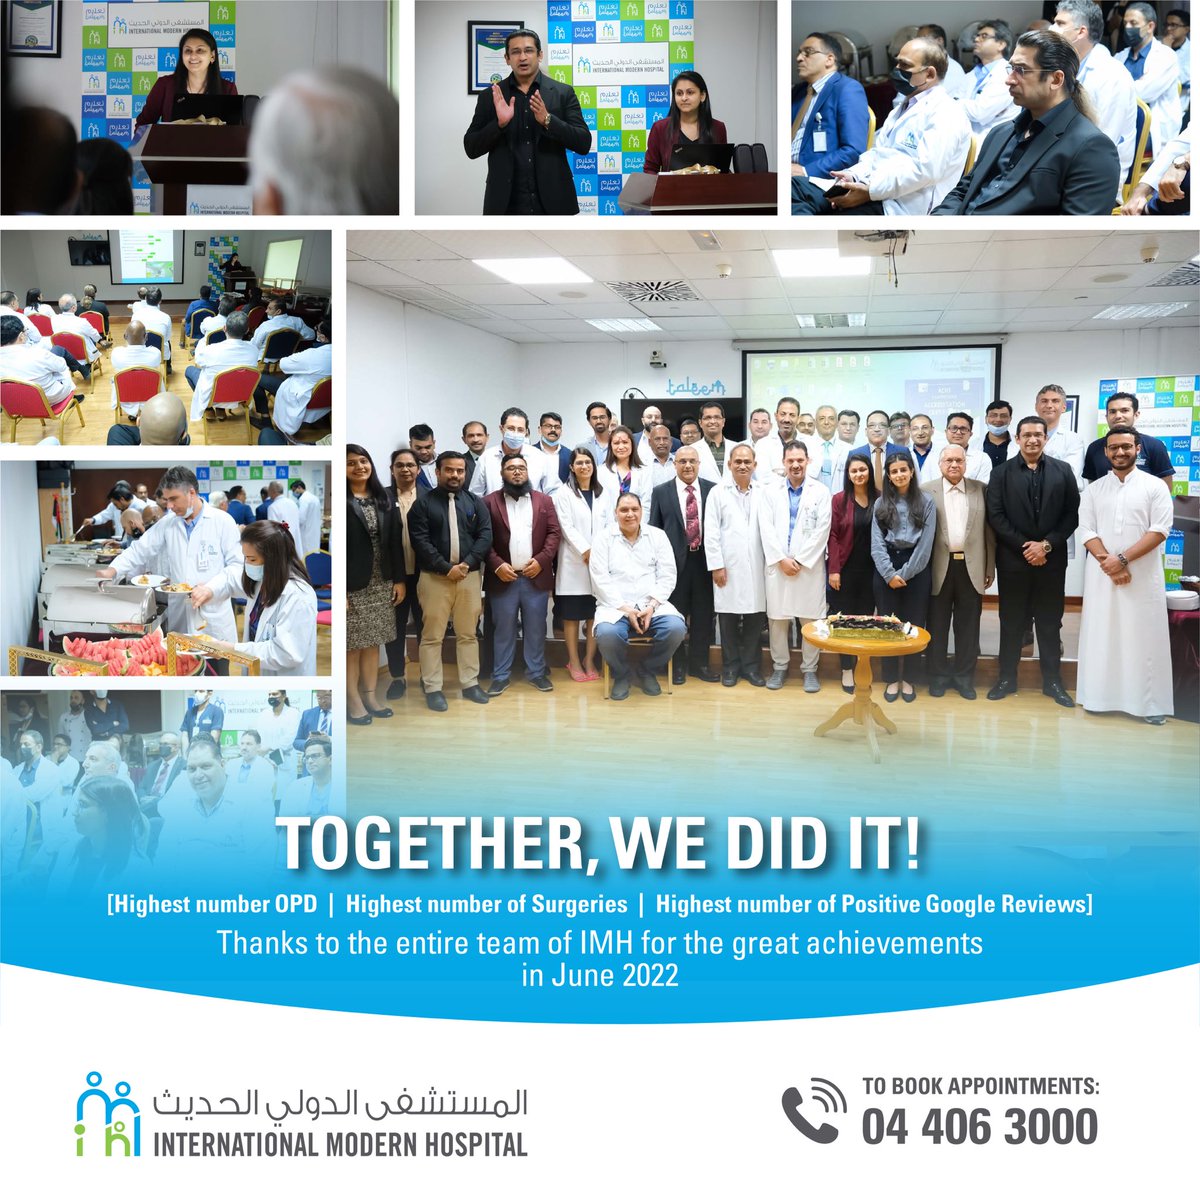 This is to appreciate our team at IMH for the hard-work & the great achievements in June 2022. In June, we had the - 𝐇𝐢𝐠𝐡𝐞𝐬𝐭 𝐧𝐮𝐦𝐛𝐞𝐫 𝐎𝐏𝐃 - 𝐇𝐢𝐠𝐡𝐞𝐬𝐭 𝐧𝐮𝐦𝐛𝐞𝐫 𝐒𝐮𝐫𝐠𝐞𝐫𝐢𝐞𝐬 - 𝐇𝐢𝐠𝐡𝐞𝐬𝐭 𝐧𝐮𝐦𝐛𝐞𝐫 𝐏𝐨𝐬𝐢𝐭𝐢𝐯𝐞 𝐆𝐨𝐨𝐠𝐥𝐞 𝐑𝐞𝐯𝐢𝐞𝐰𝐬